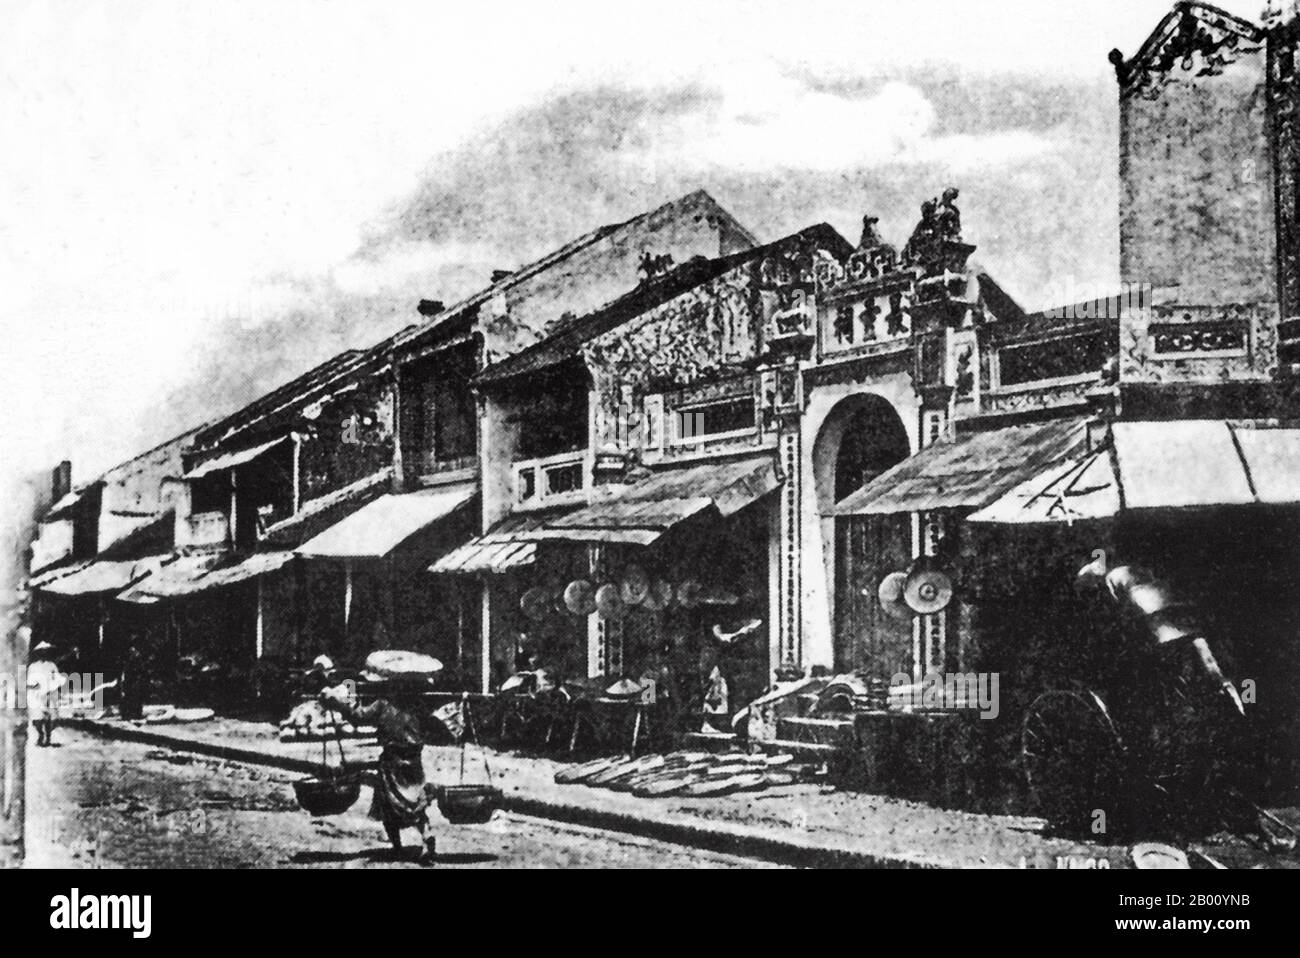 Vietnam: Hang Non or Hat Street, Old Quarter, Hanoi, 1905. The Old Quarter,  near Hoan Kiem Lake, consisted of only about 36 streets at the beginning of  the 20th century. Each street